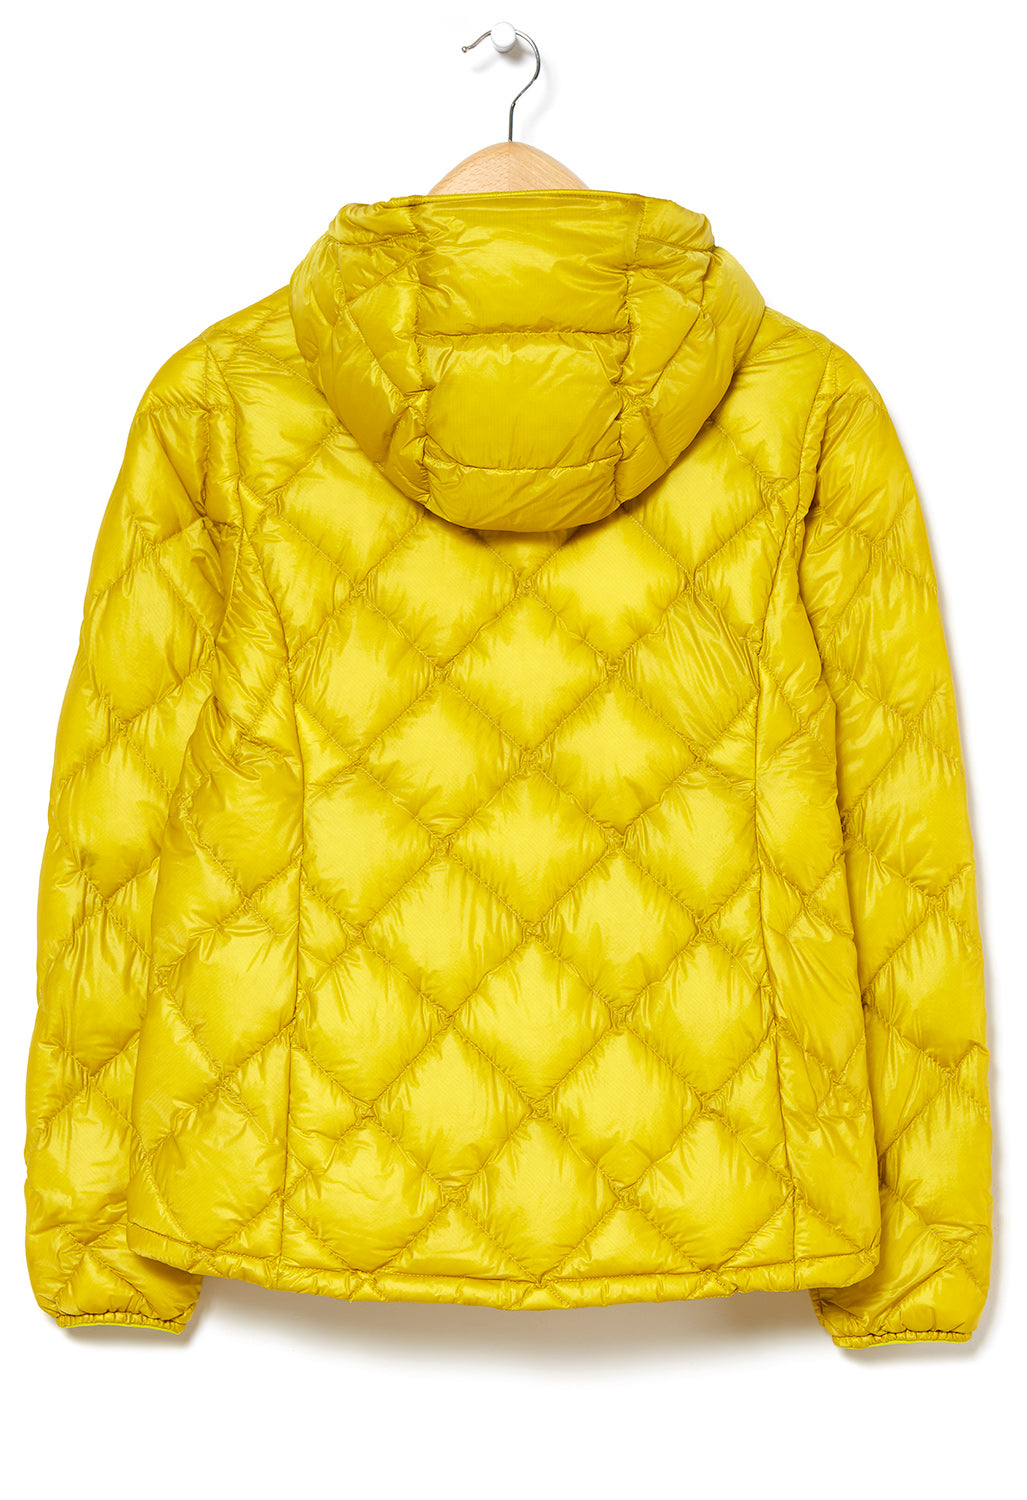 Montbell Women's Superior Down Parka Jacket - Yellow